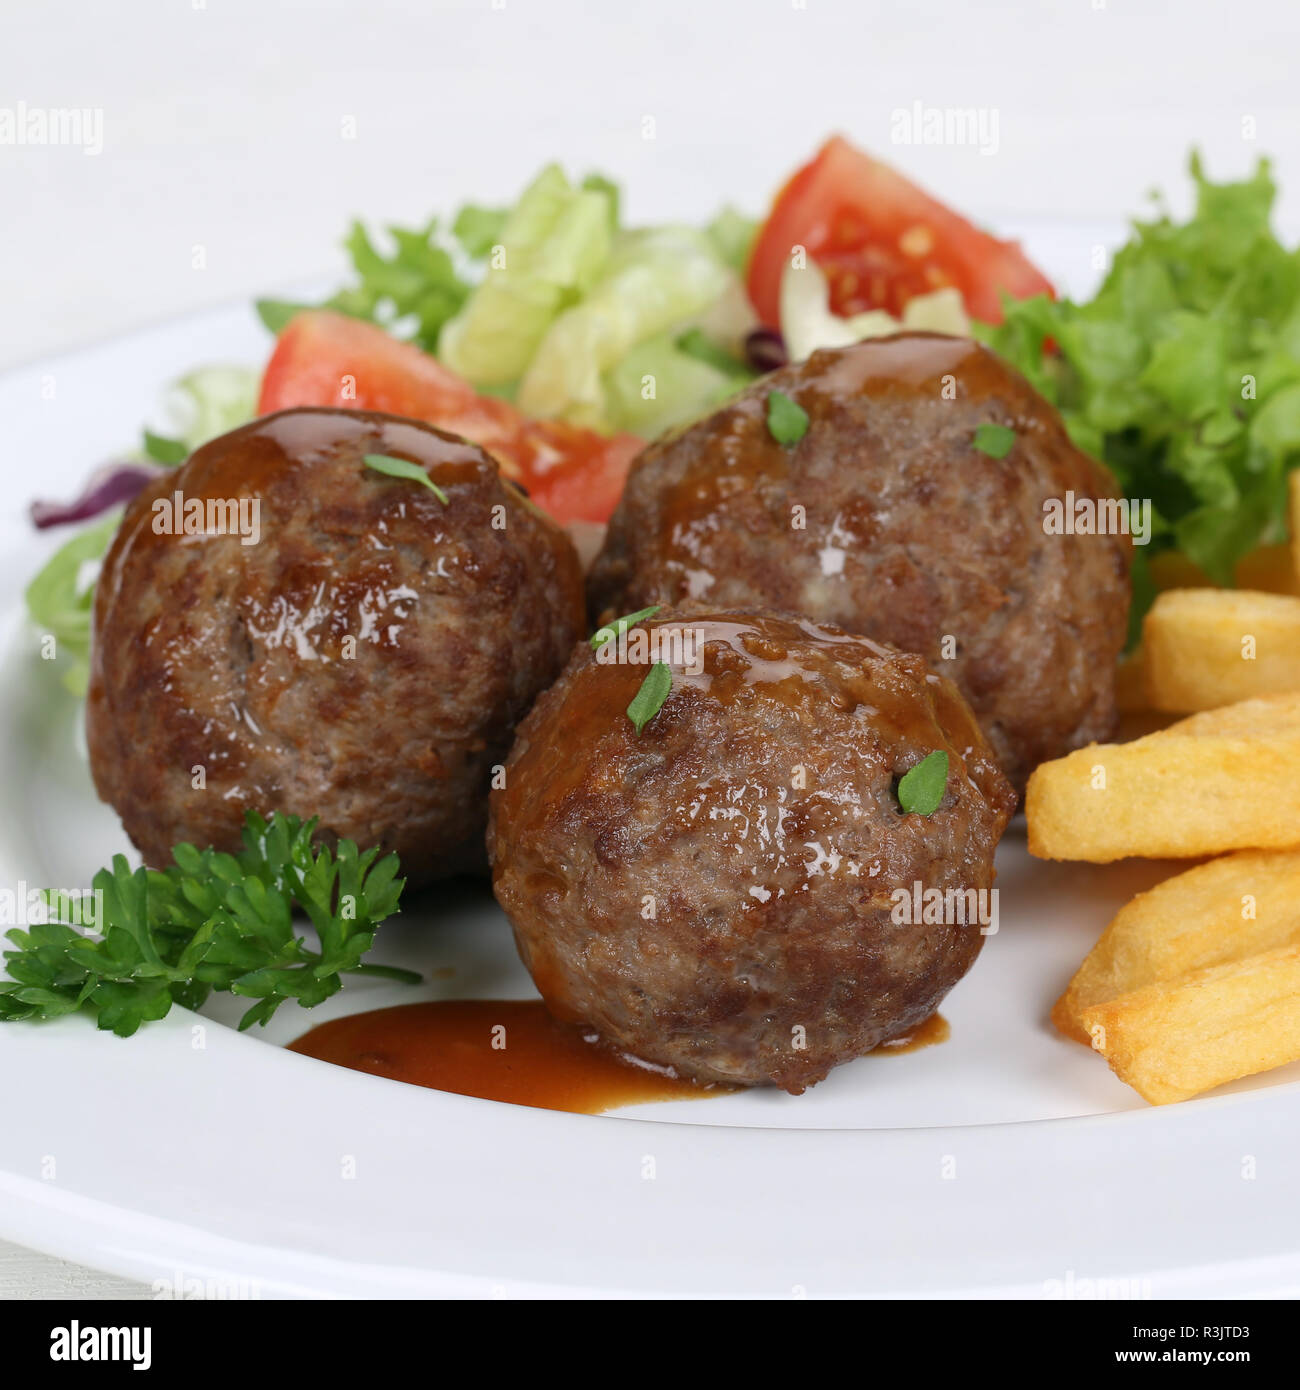 meatballs meatballs meat buns meatball dish with fries and salad Stock Photo